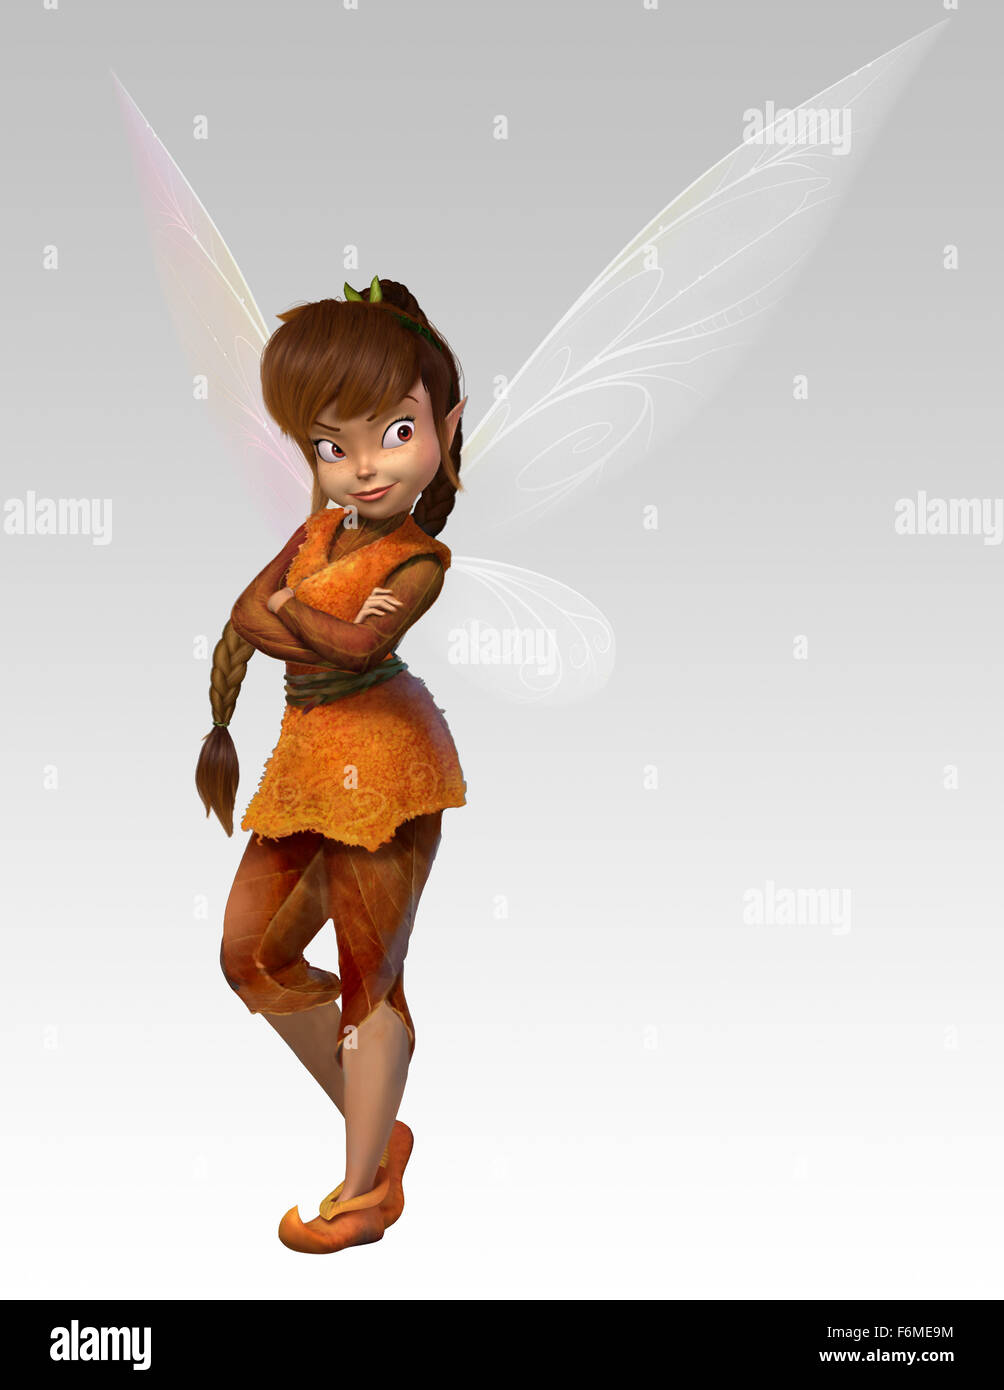 RELEASE DATE: October 16, 2009. MOVIE TITLE: Tinker Bell and the Lost Treasure. STUDIO: DisneyToon Studios. PLOT: Tinker Bell journey far North of Never Land to patch things up with her friend Terence and restore a Pixie Dust Tree. PICTURED: . Stock Photo